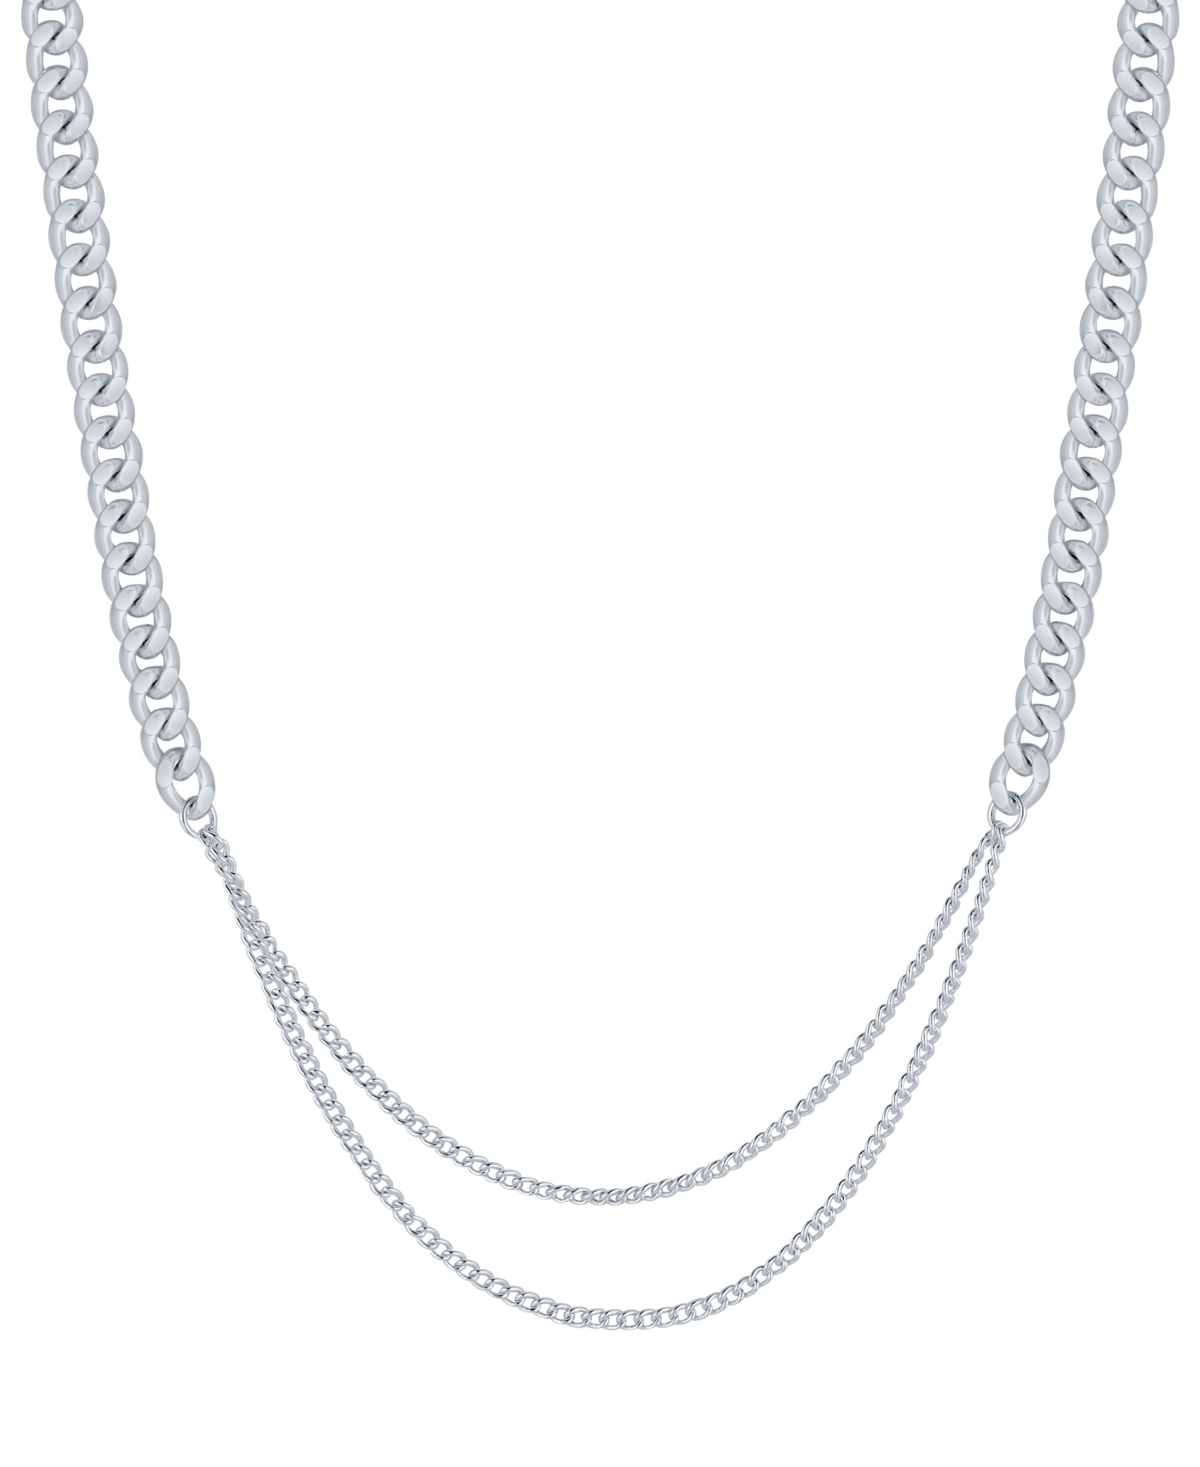 Fine Silver-Plated Curb Chain Necklace - Silver